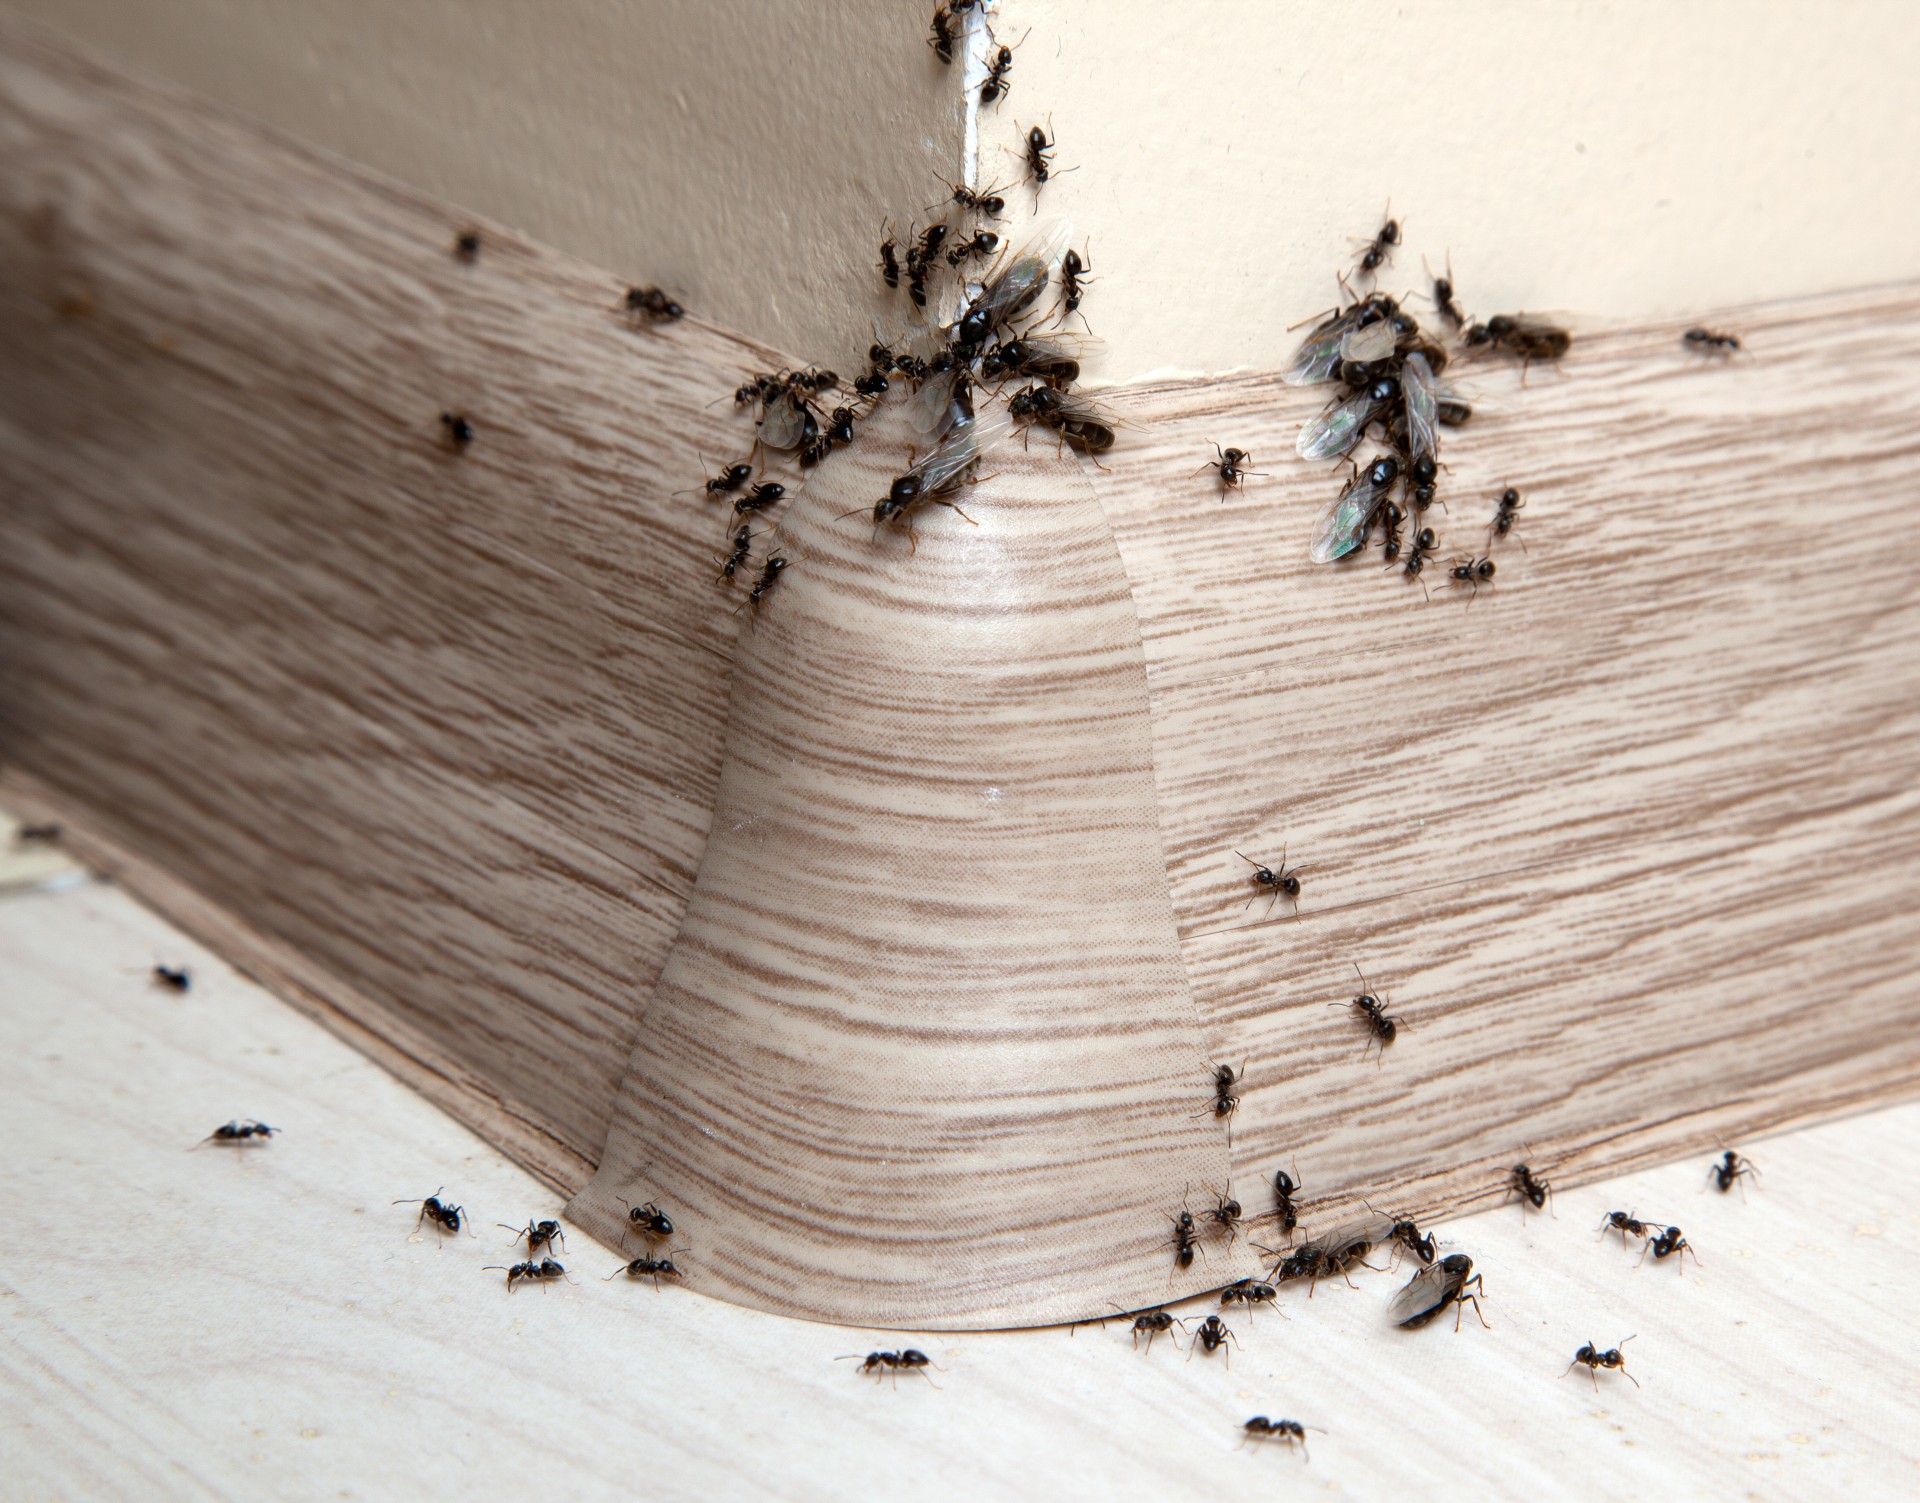 Ant Infestation, Pest Control in Addlestone, New Haw, Woodham, KT15. Call Now 020 8166 9746